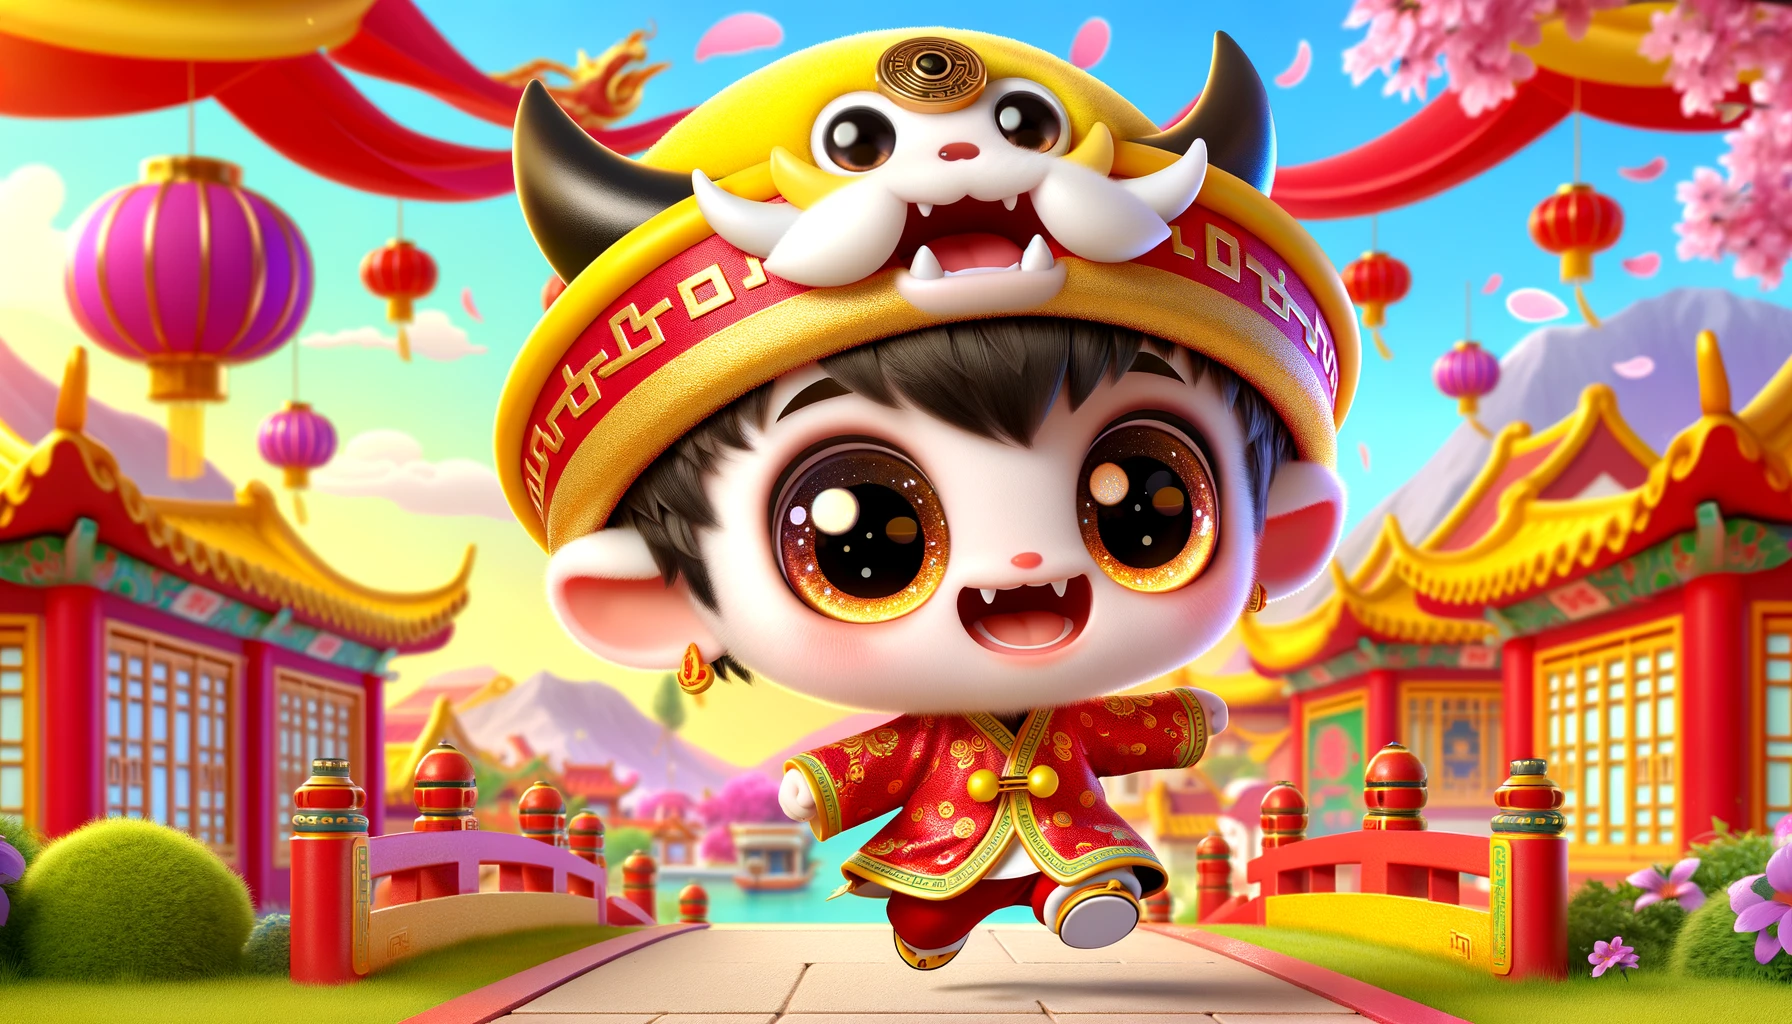 A charming and adorable baby Jiangshi in a cartoonish and colorful style. This baby Jiangshi features big, sparkly eyes and a cheerful expression. It is dressed in a vibrant red and gold Qing dynasty-inspired outfit, complete with a playful, oversized yellow hat. Its small fangs are barely visible, adding to its cuteness. The background is a bright and colorful Chinese village scene during the day, with traditional architecture and festive decorations. The baby Jiangshi is playfully leaping with a joyful expression, in a wide, dynamic pose.